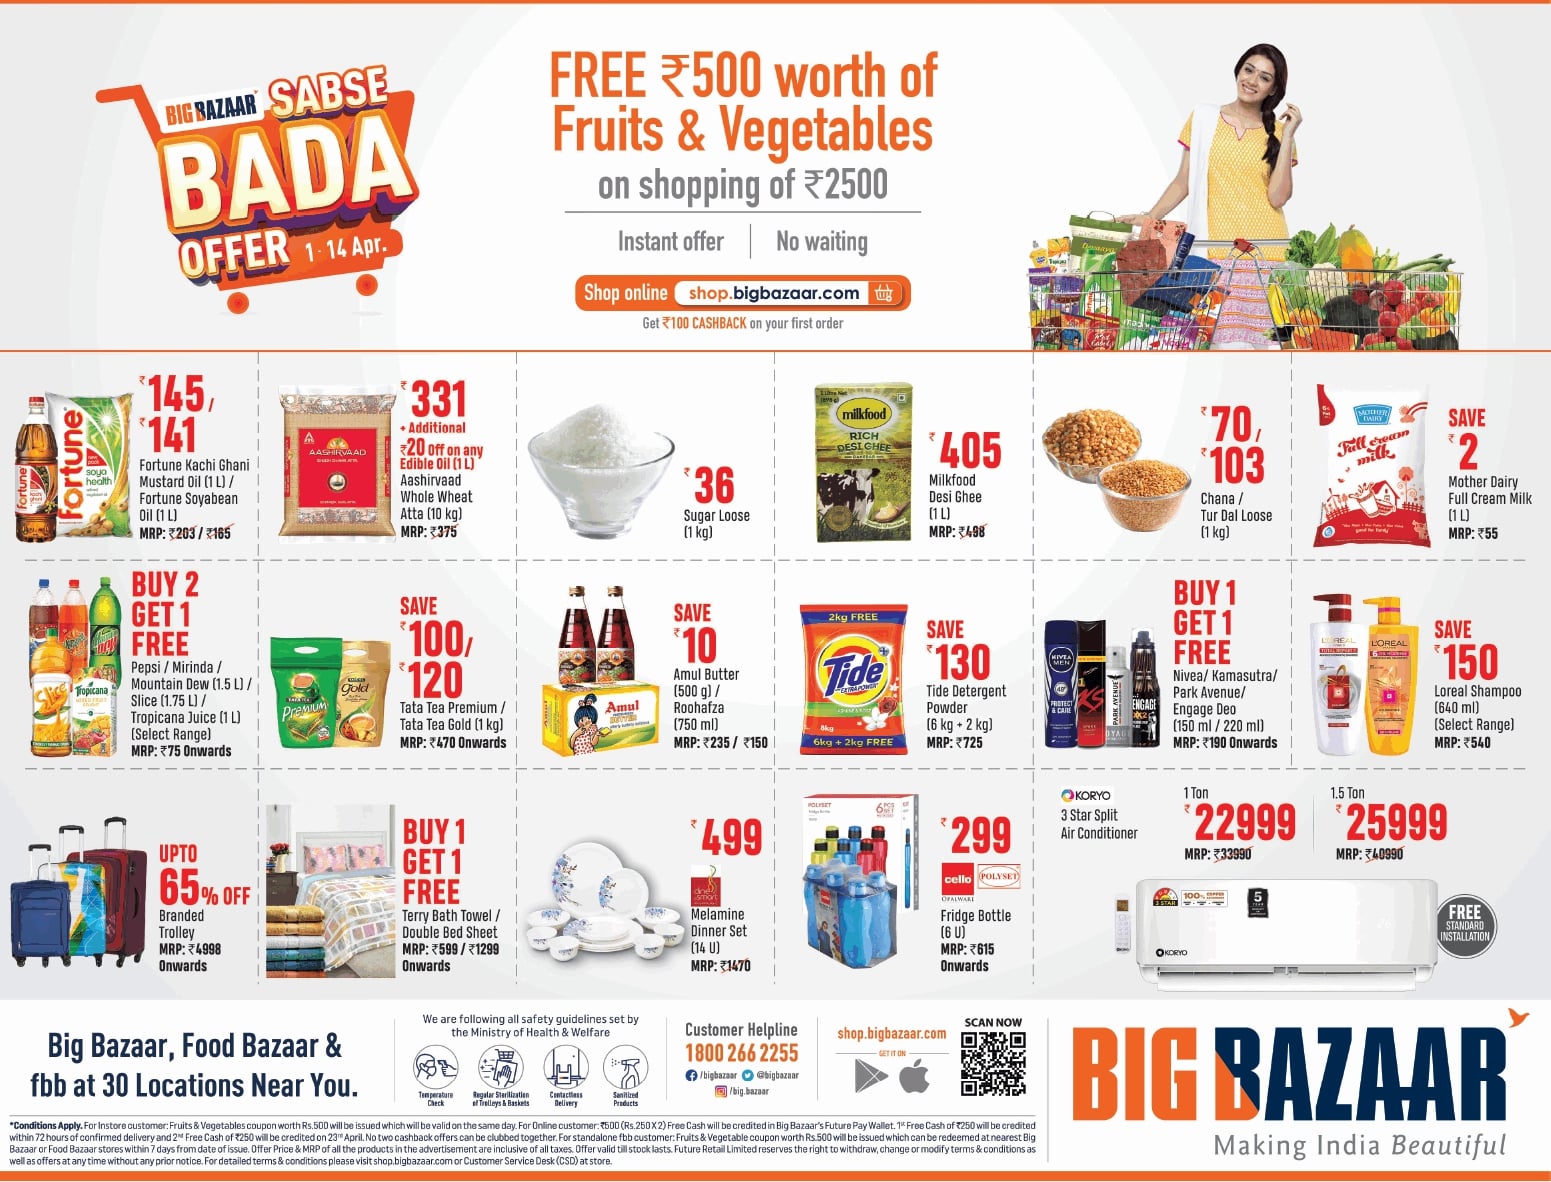 big-bazaar-sabse-bada-offer-free-500-worth-of-fruits-and-vegetable-on-shopping-of-2500-ad-delhi-times-07-04-2021